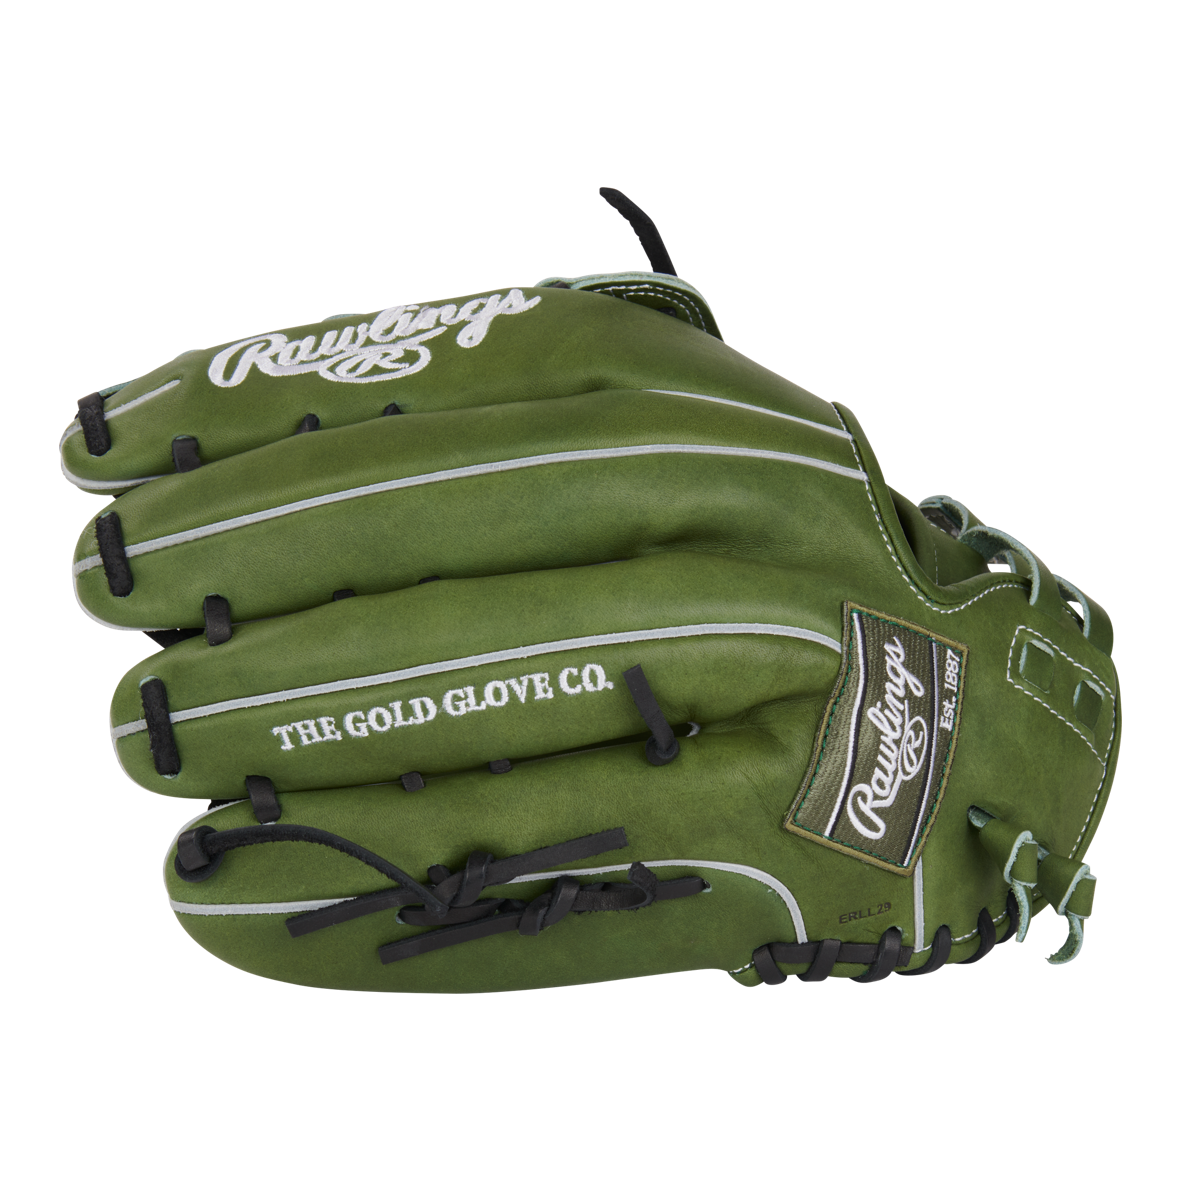 HEART OF THE HIDE PRO130SP 13" SOFTBALL GLOVE